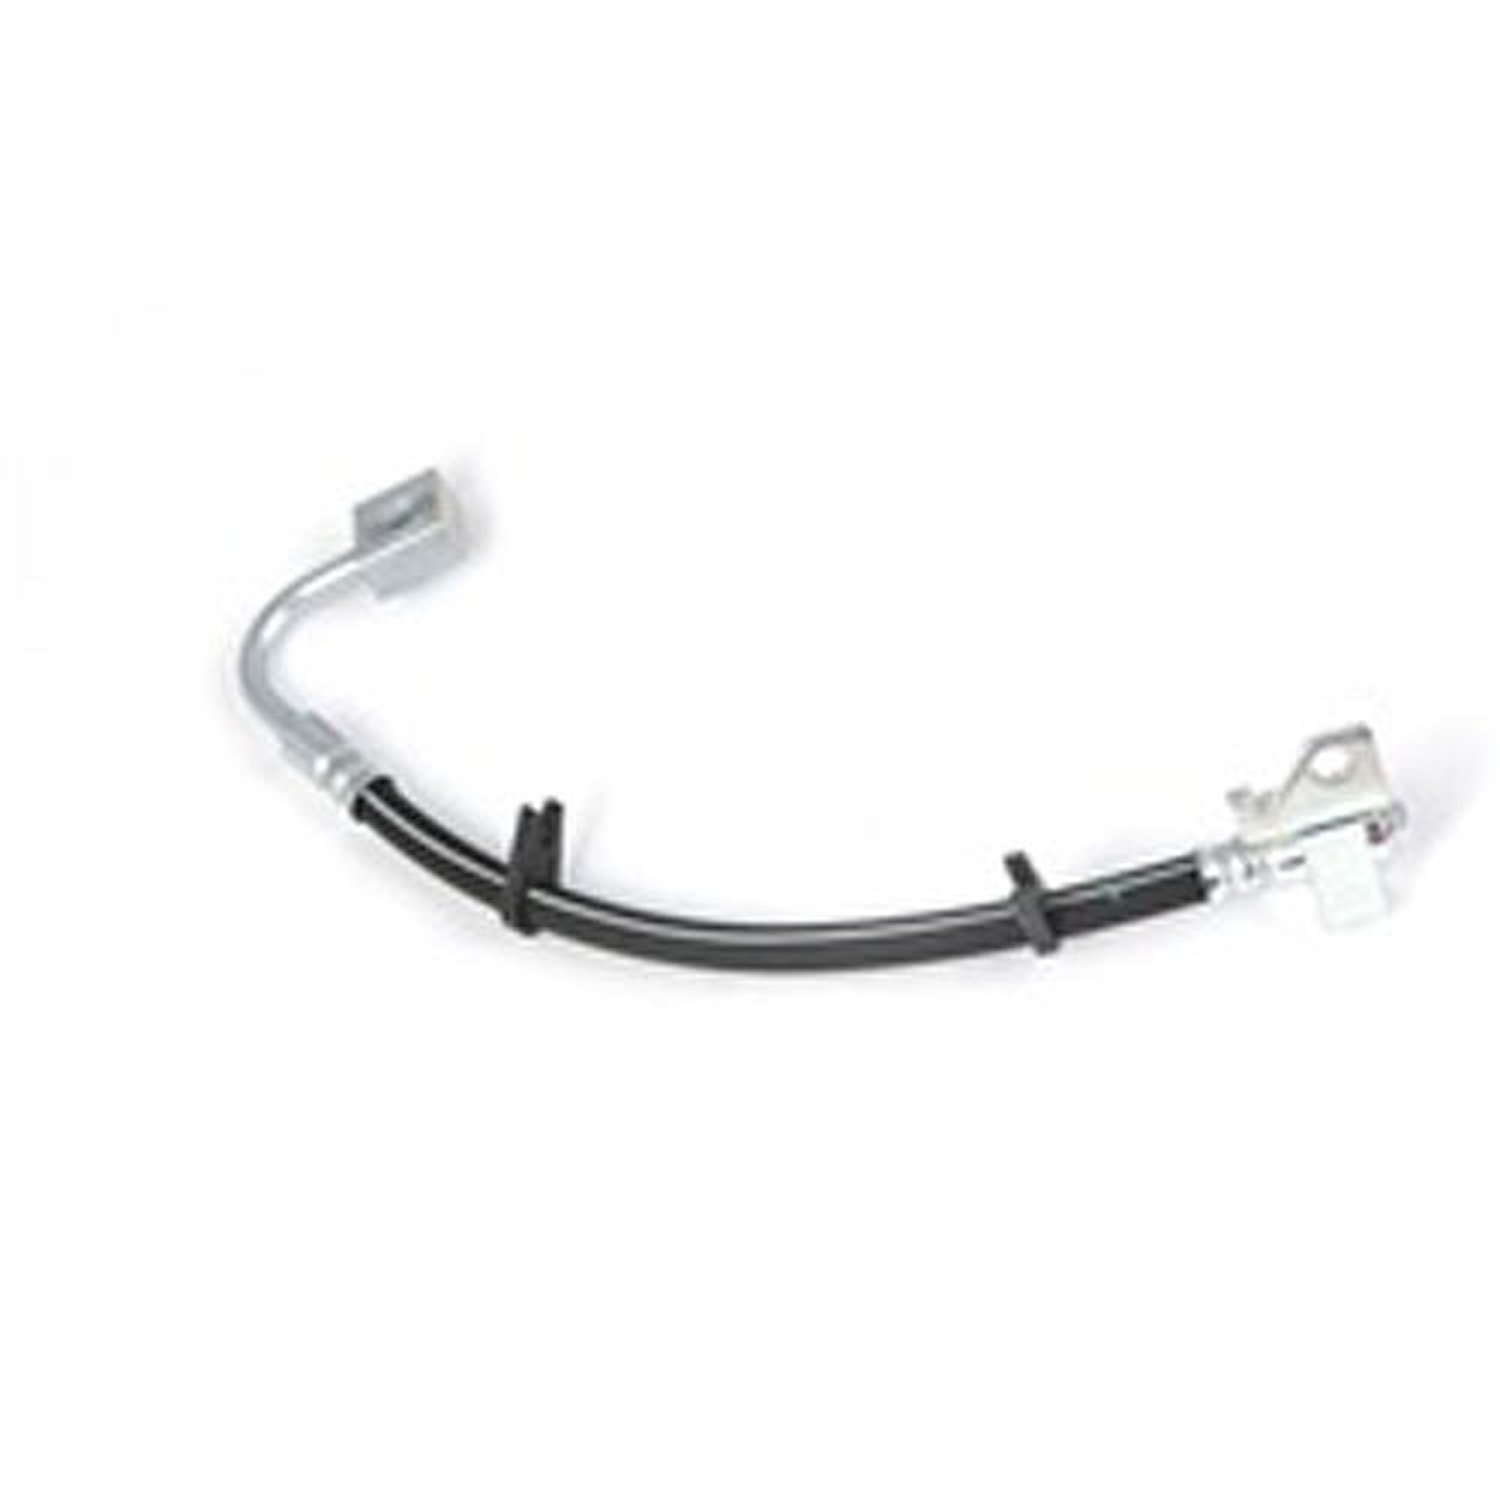 This right rear brake hose from Omix-ADA fits 05-10 Jeep Grand Cherokees SRT-8s and 06-10 Commanders with disc brakes.